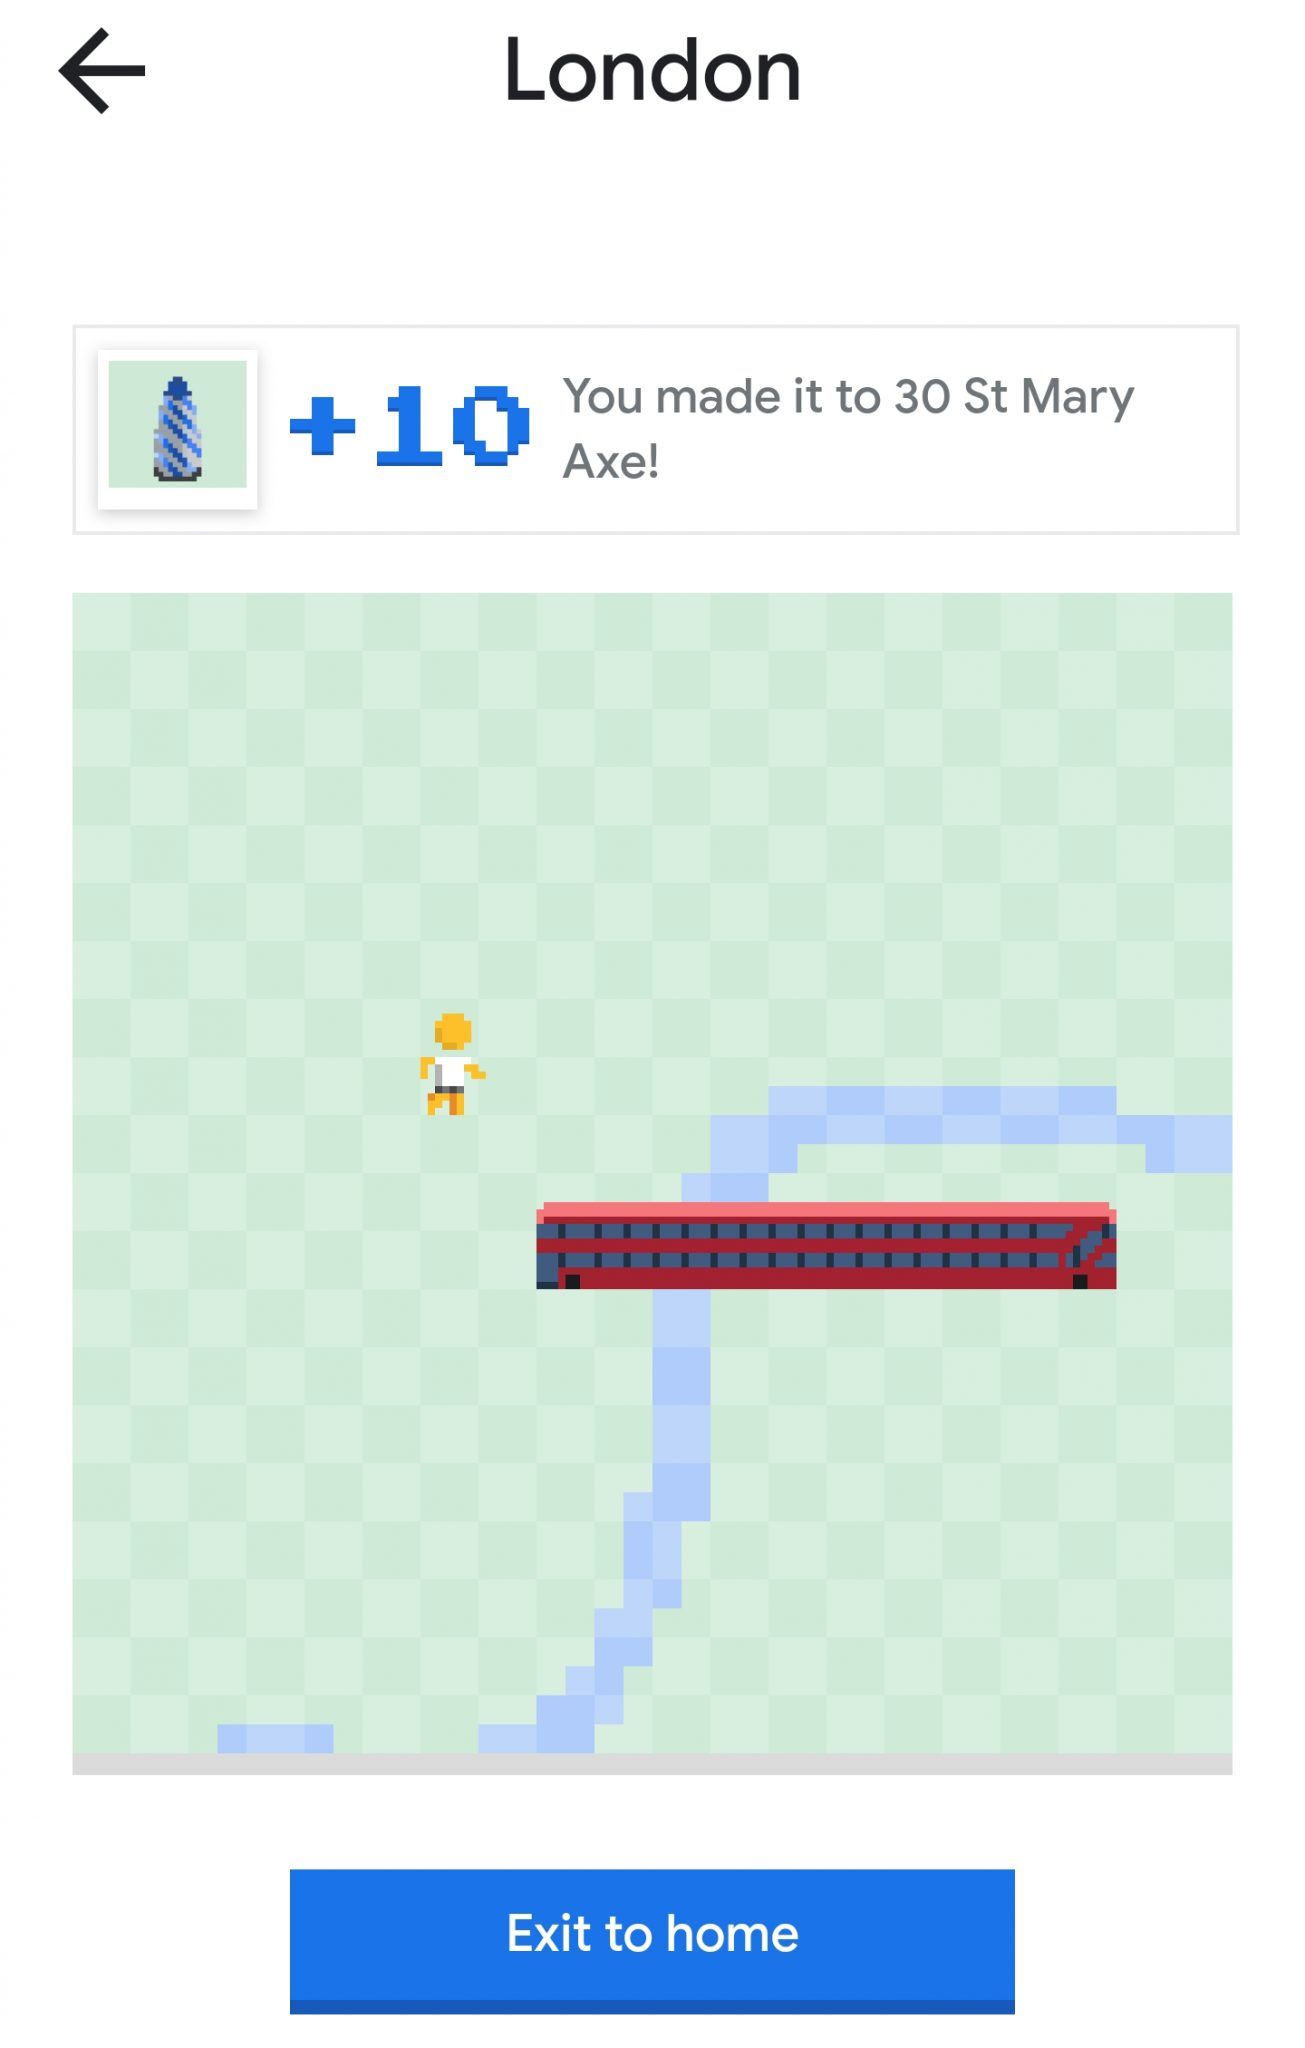 Google Maps Brings Back Snake for April Fools' Day: Here's How to Play